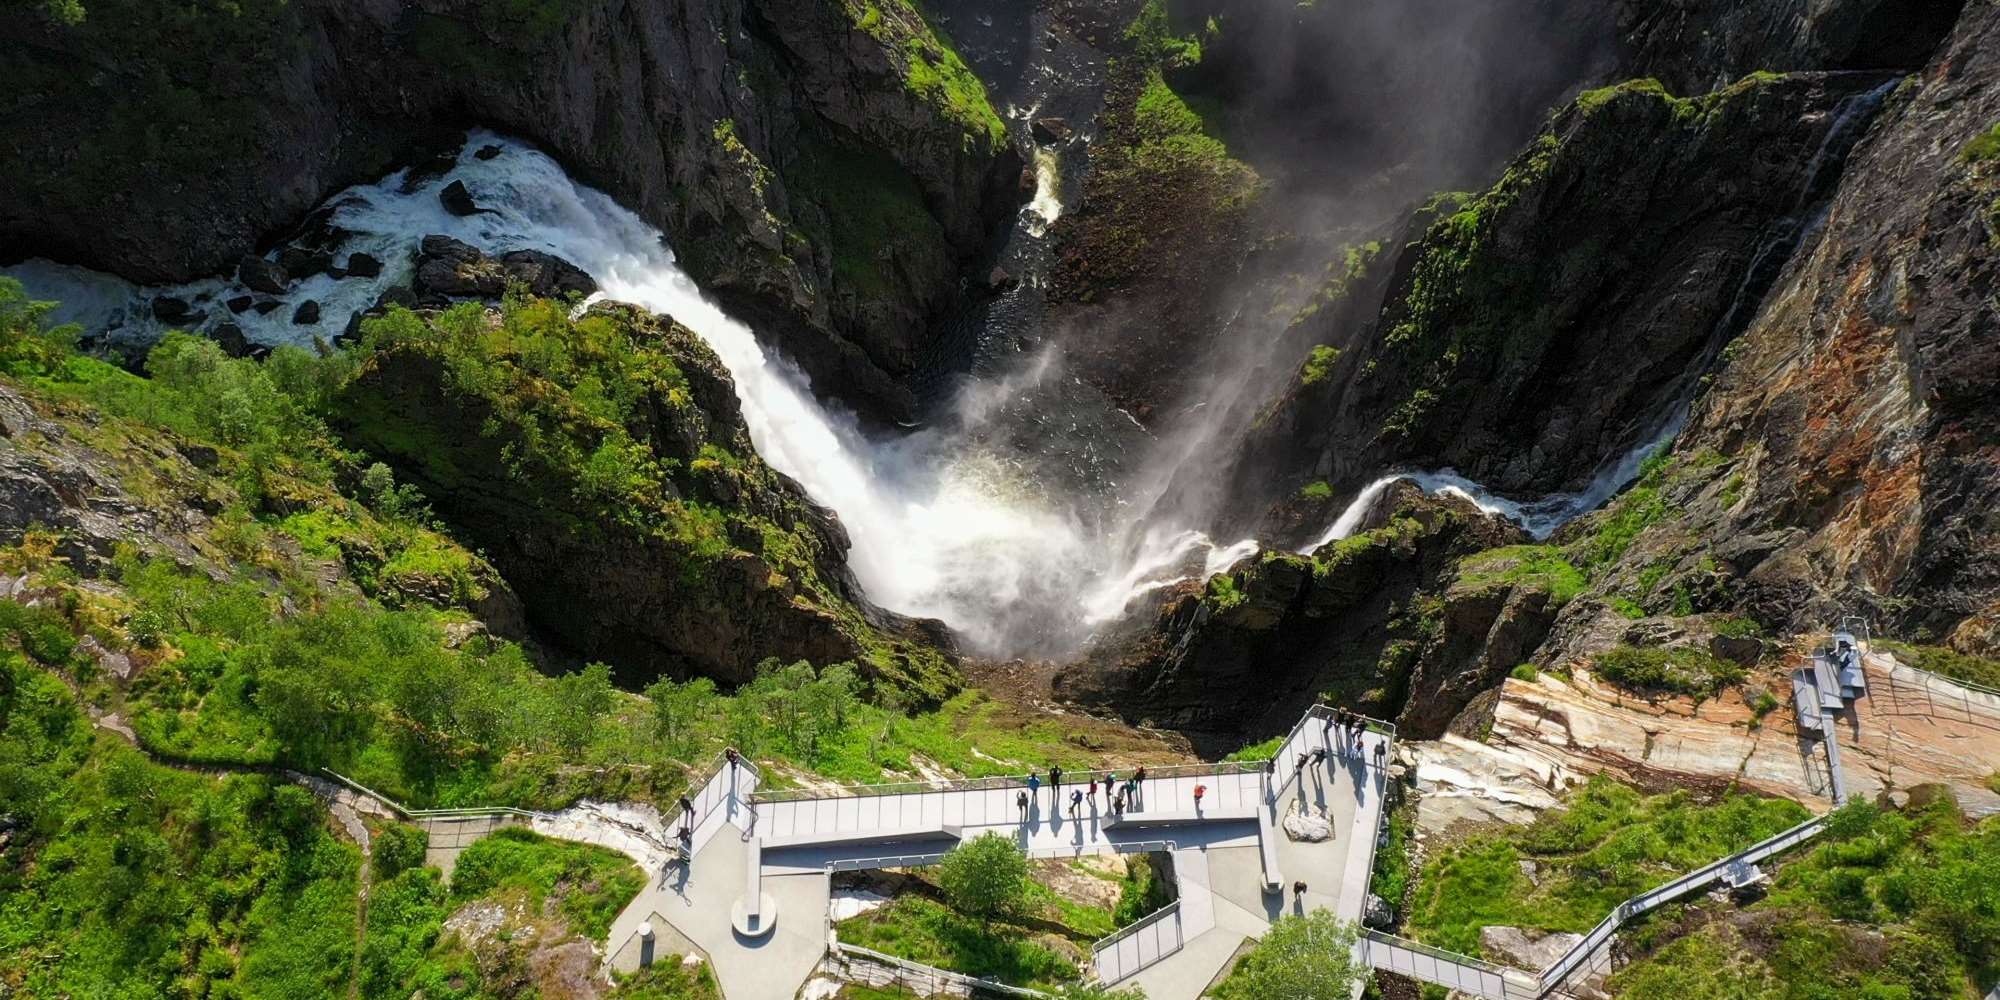 A view of the Vøringsfossen area - a part of Norwegian Scenic Route Hardangervidda